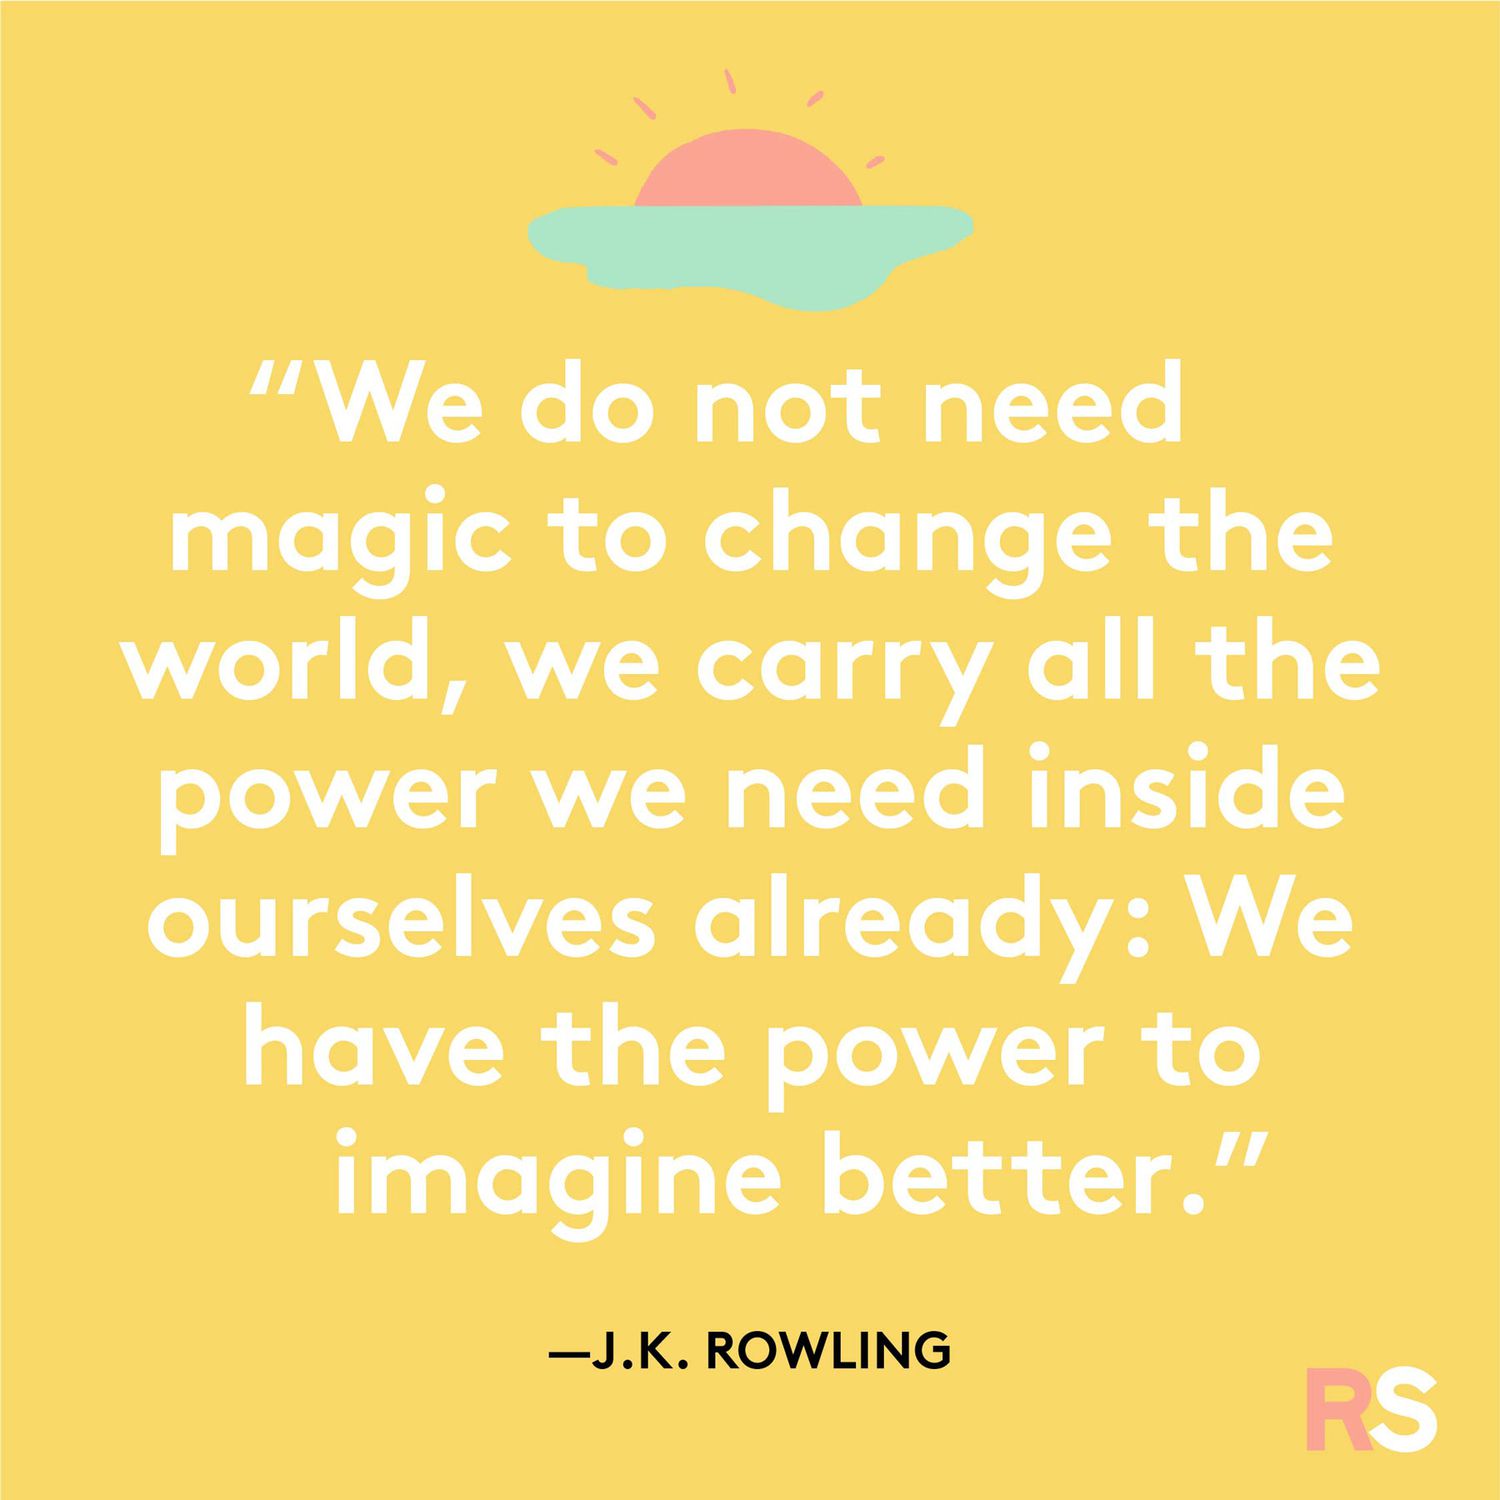 Positive motivating quotes, captions, messages – JK Rowling quote